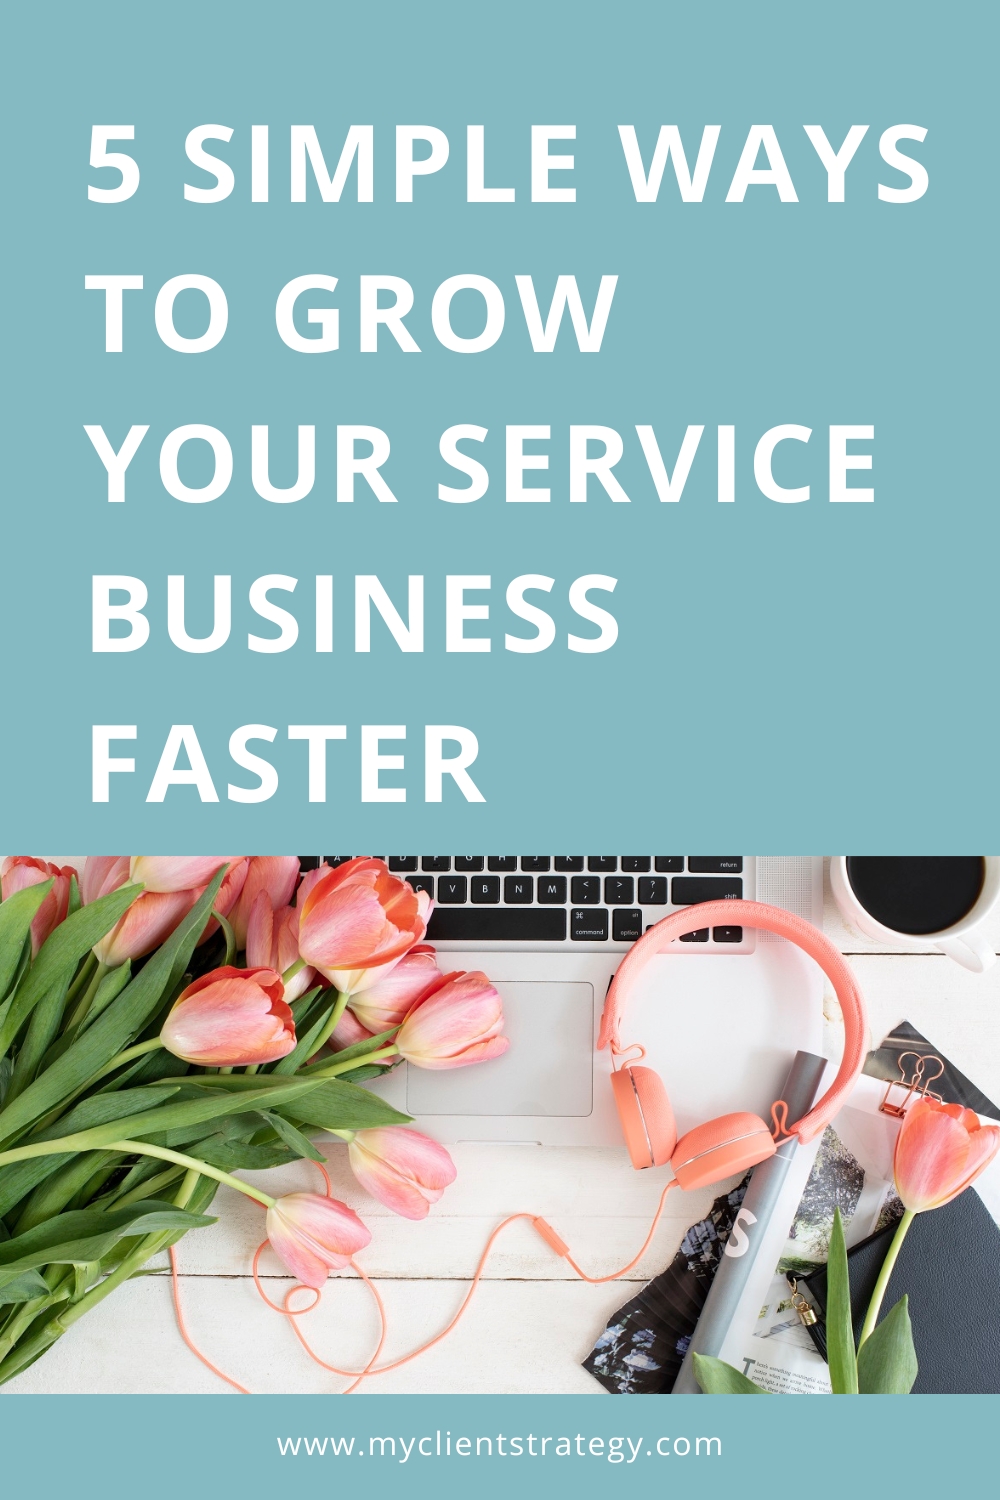  5 Simple ways to grow your service business faster